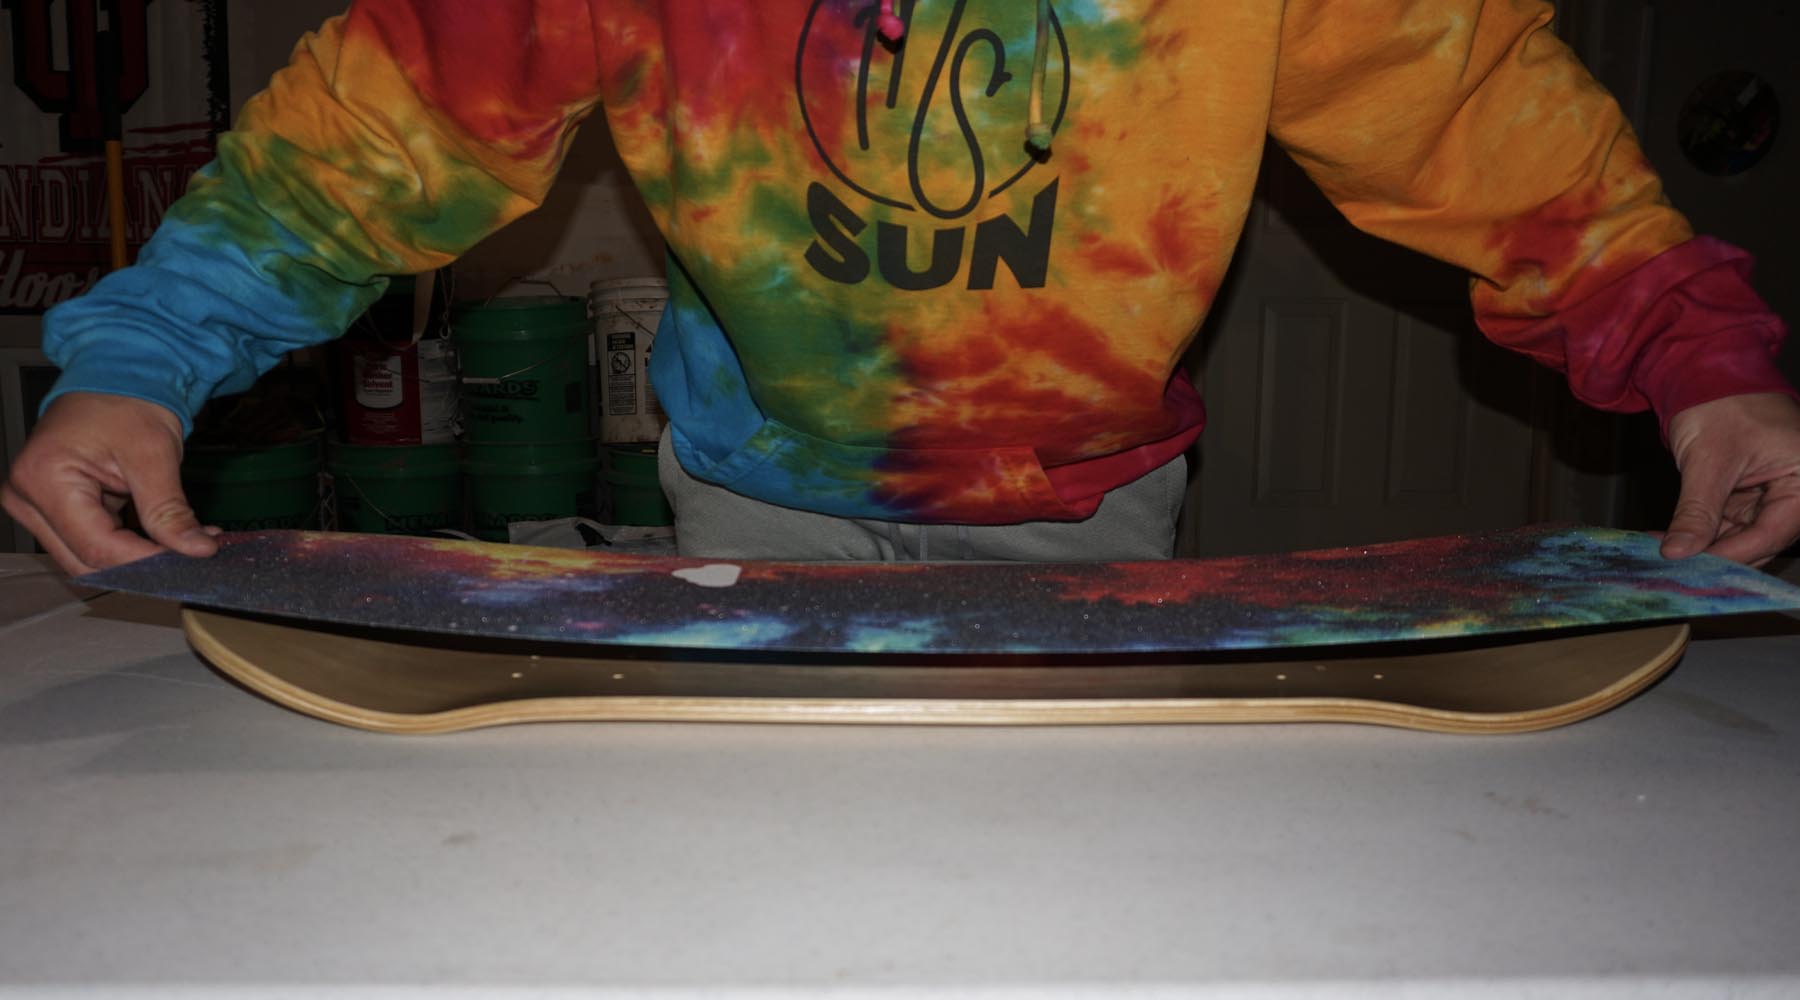 How to apply grip tape to a skateboard - image 2